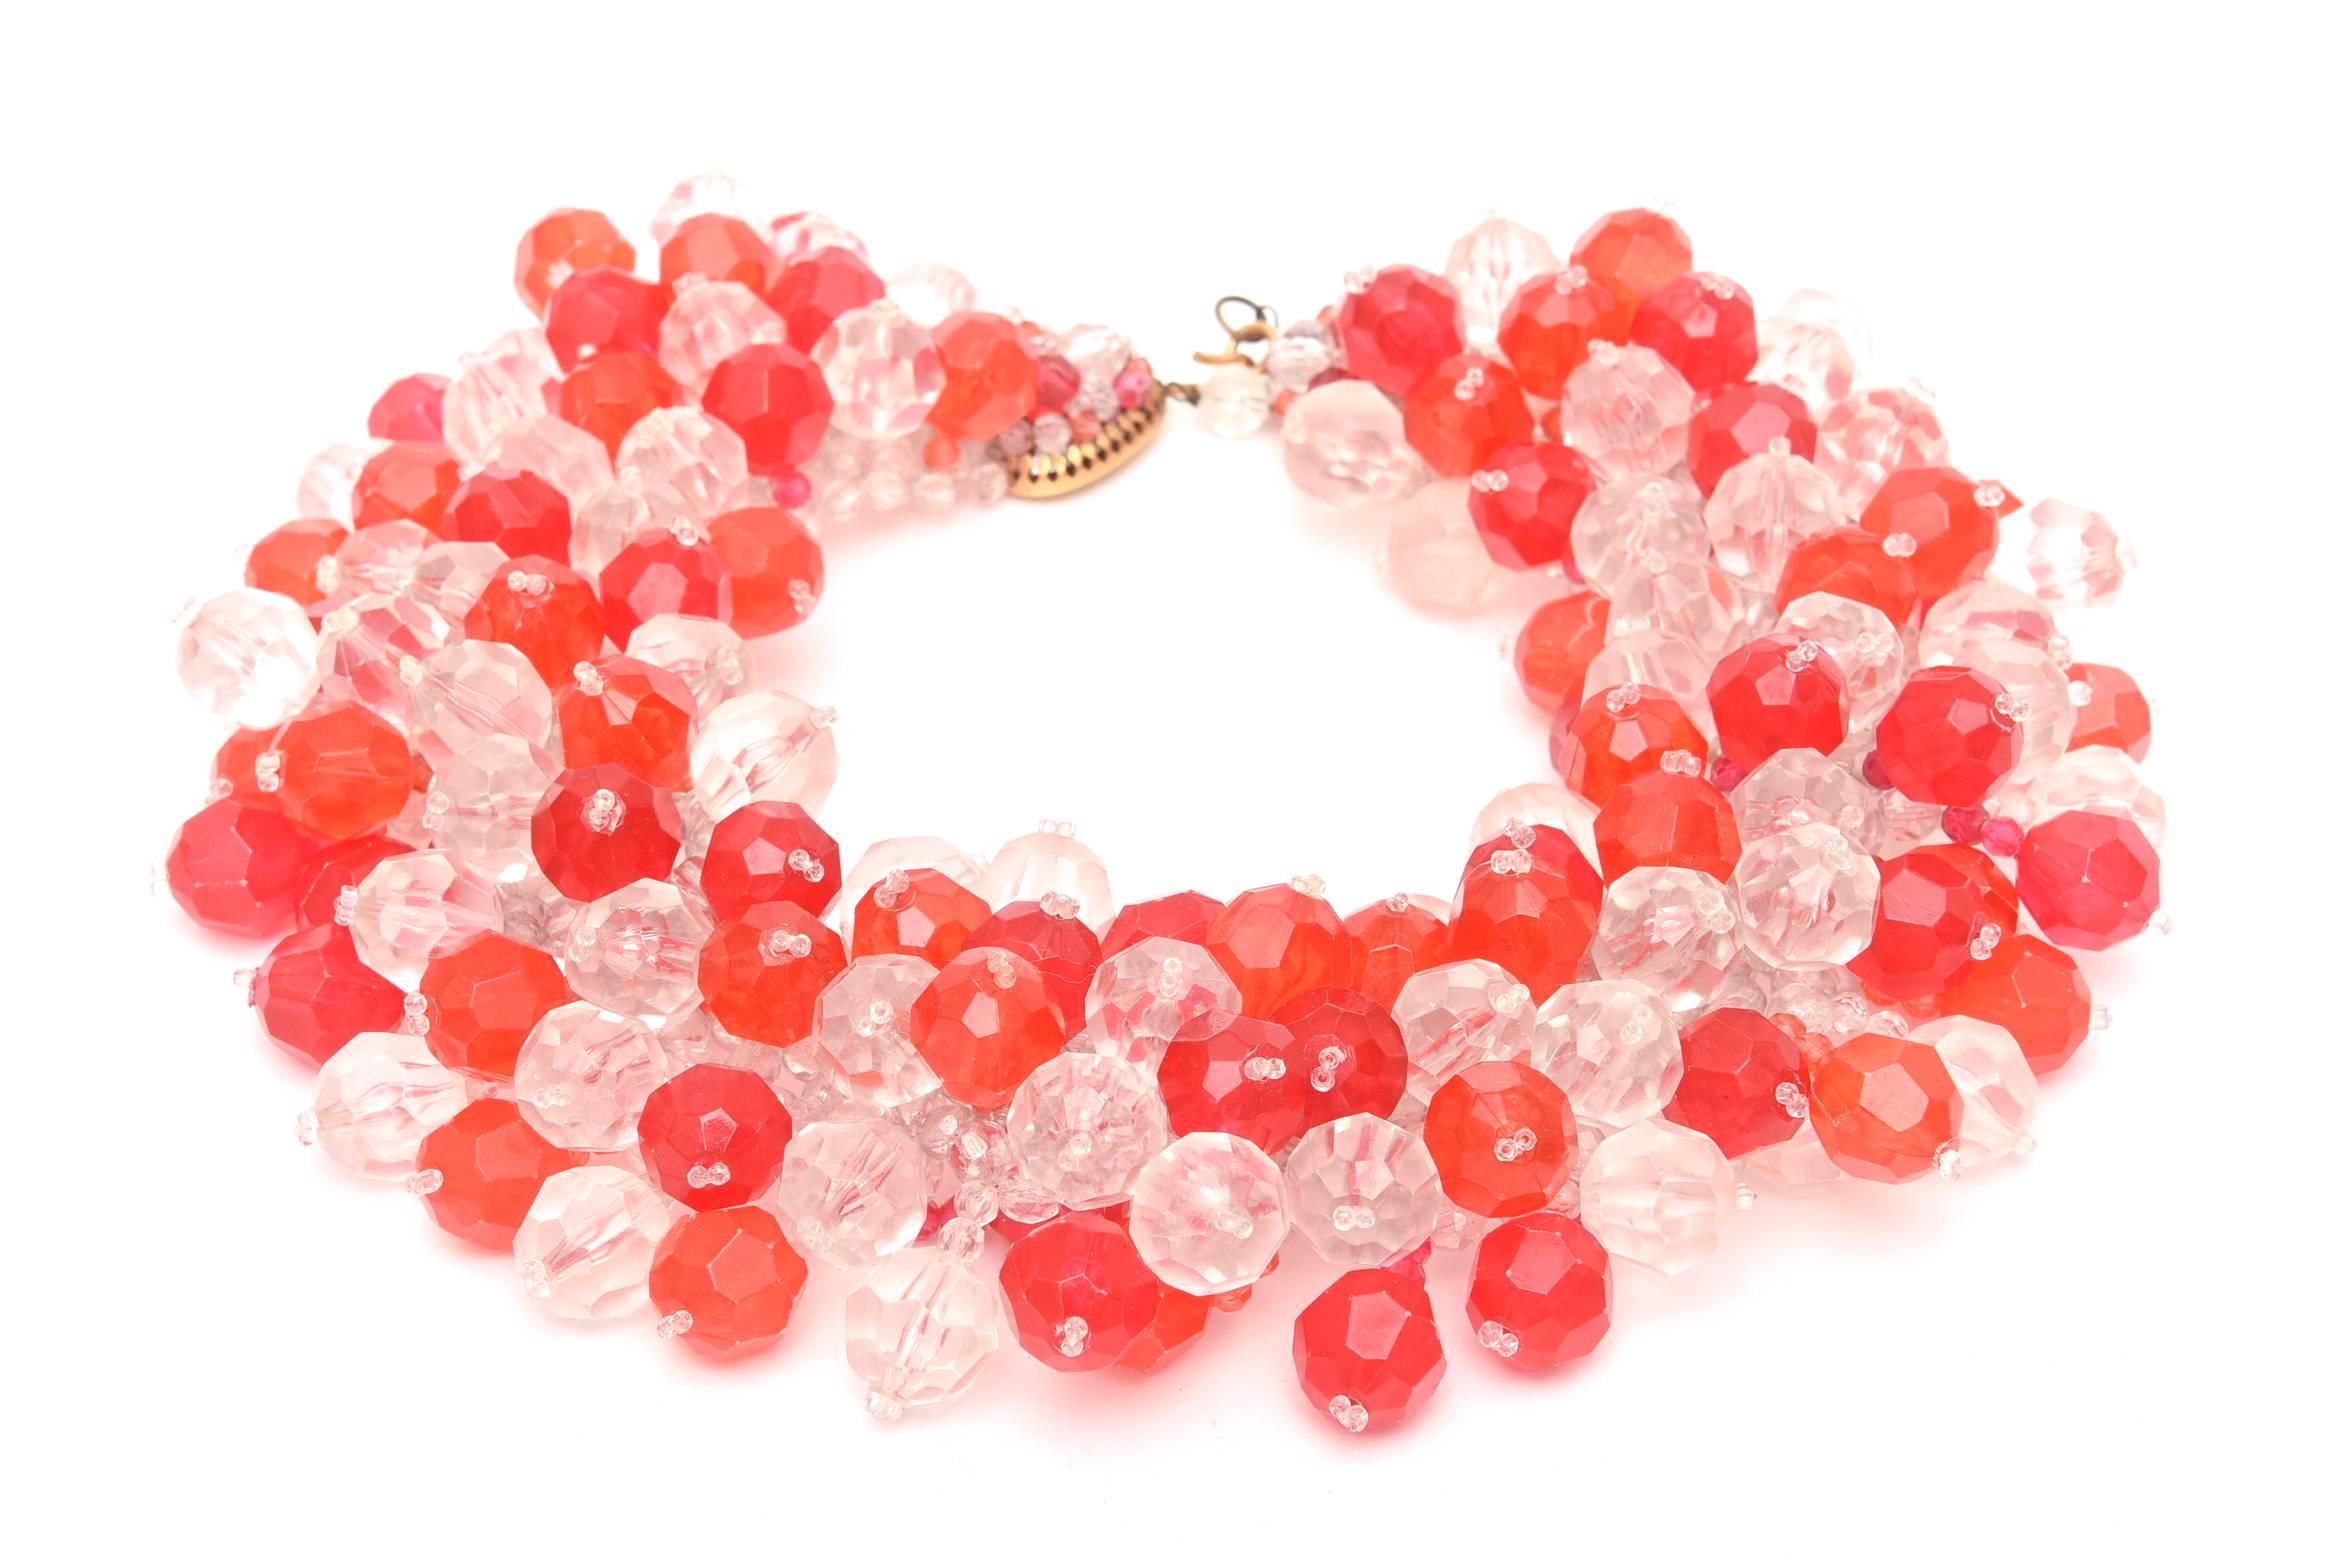 This amazing and arresting Italian vintage cluster of pop hued plastic beads in orange/red and interspersed with crystal lucite clear beads is so dramatic on the neck. It is hallmarked Made in Italy Coppola e Toppo. It was commissioned by Emilio